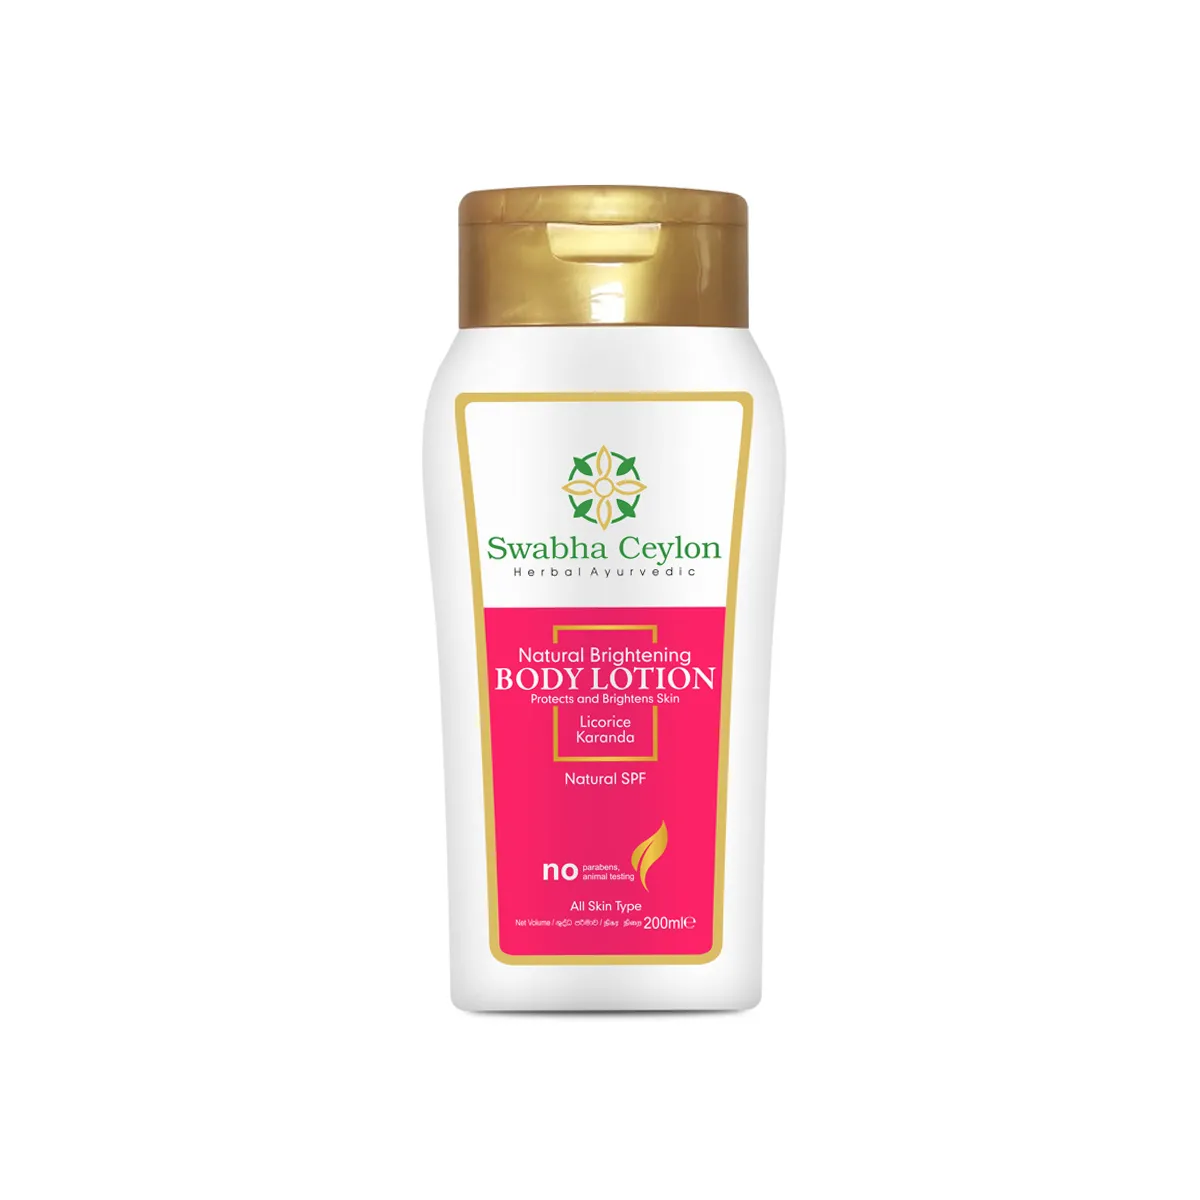 First product image of Swabha Ceylon Natural Brightening Body Lotion 200ml